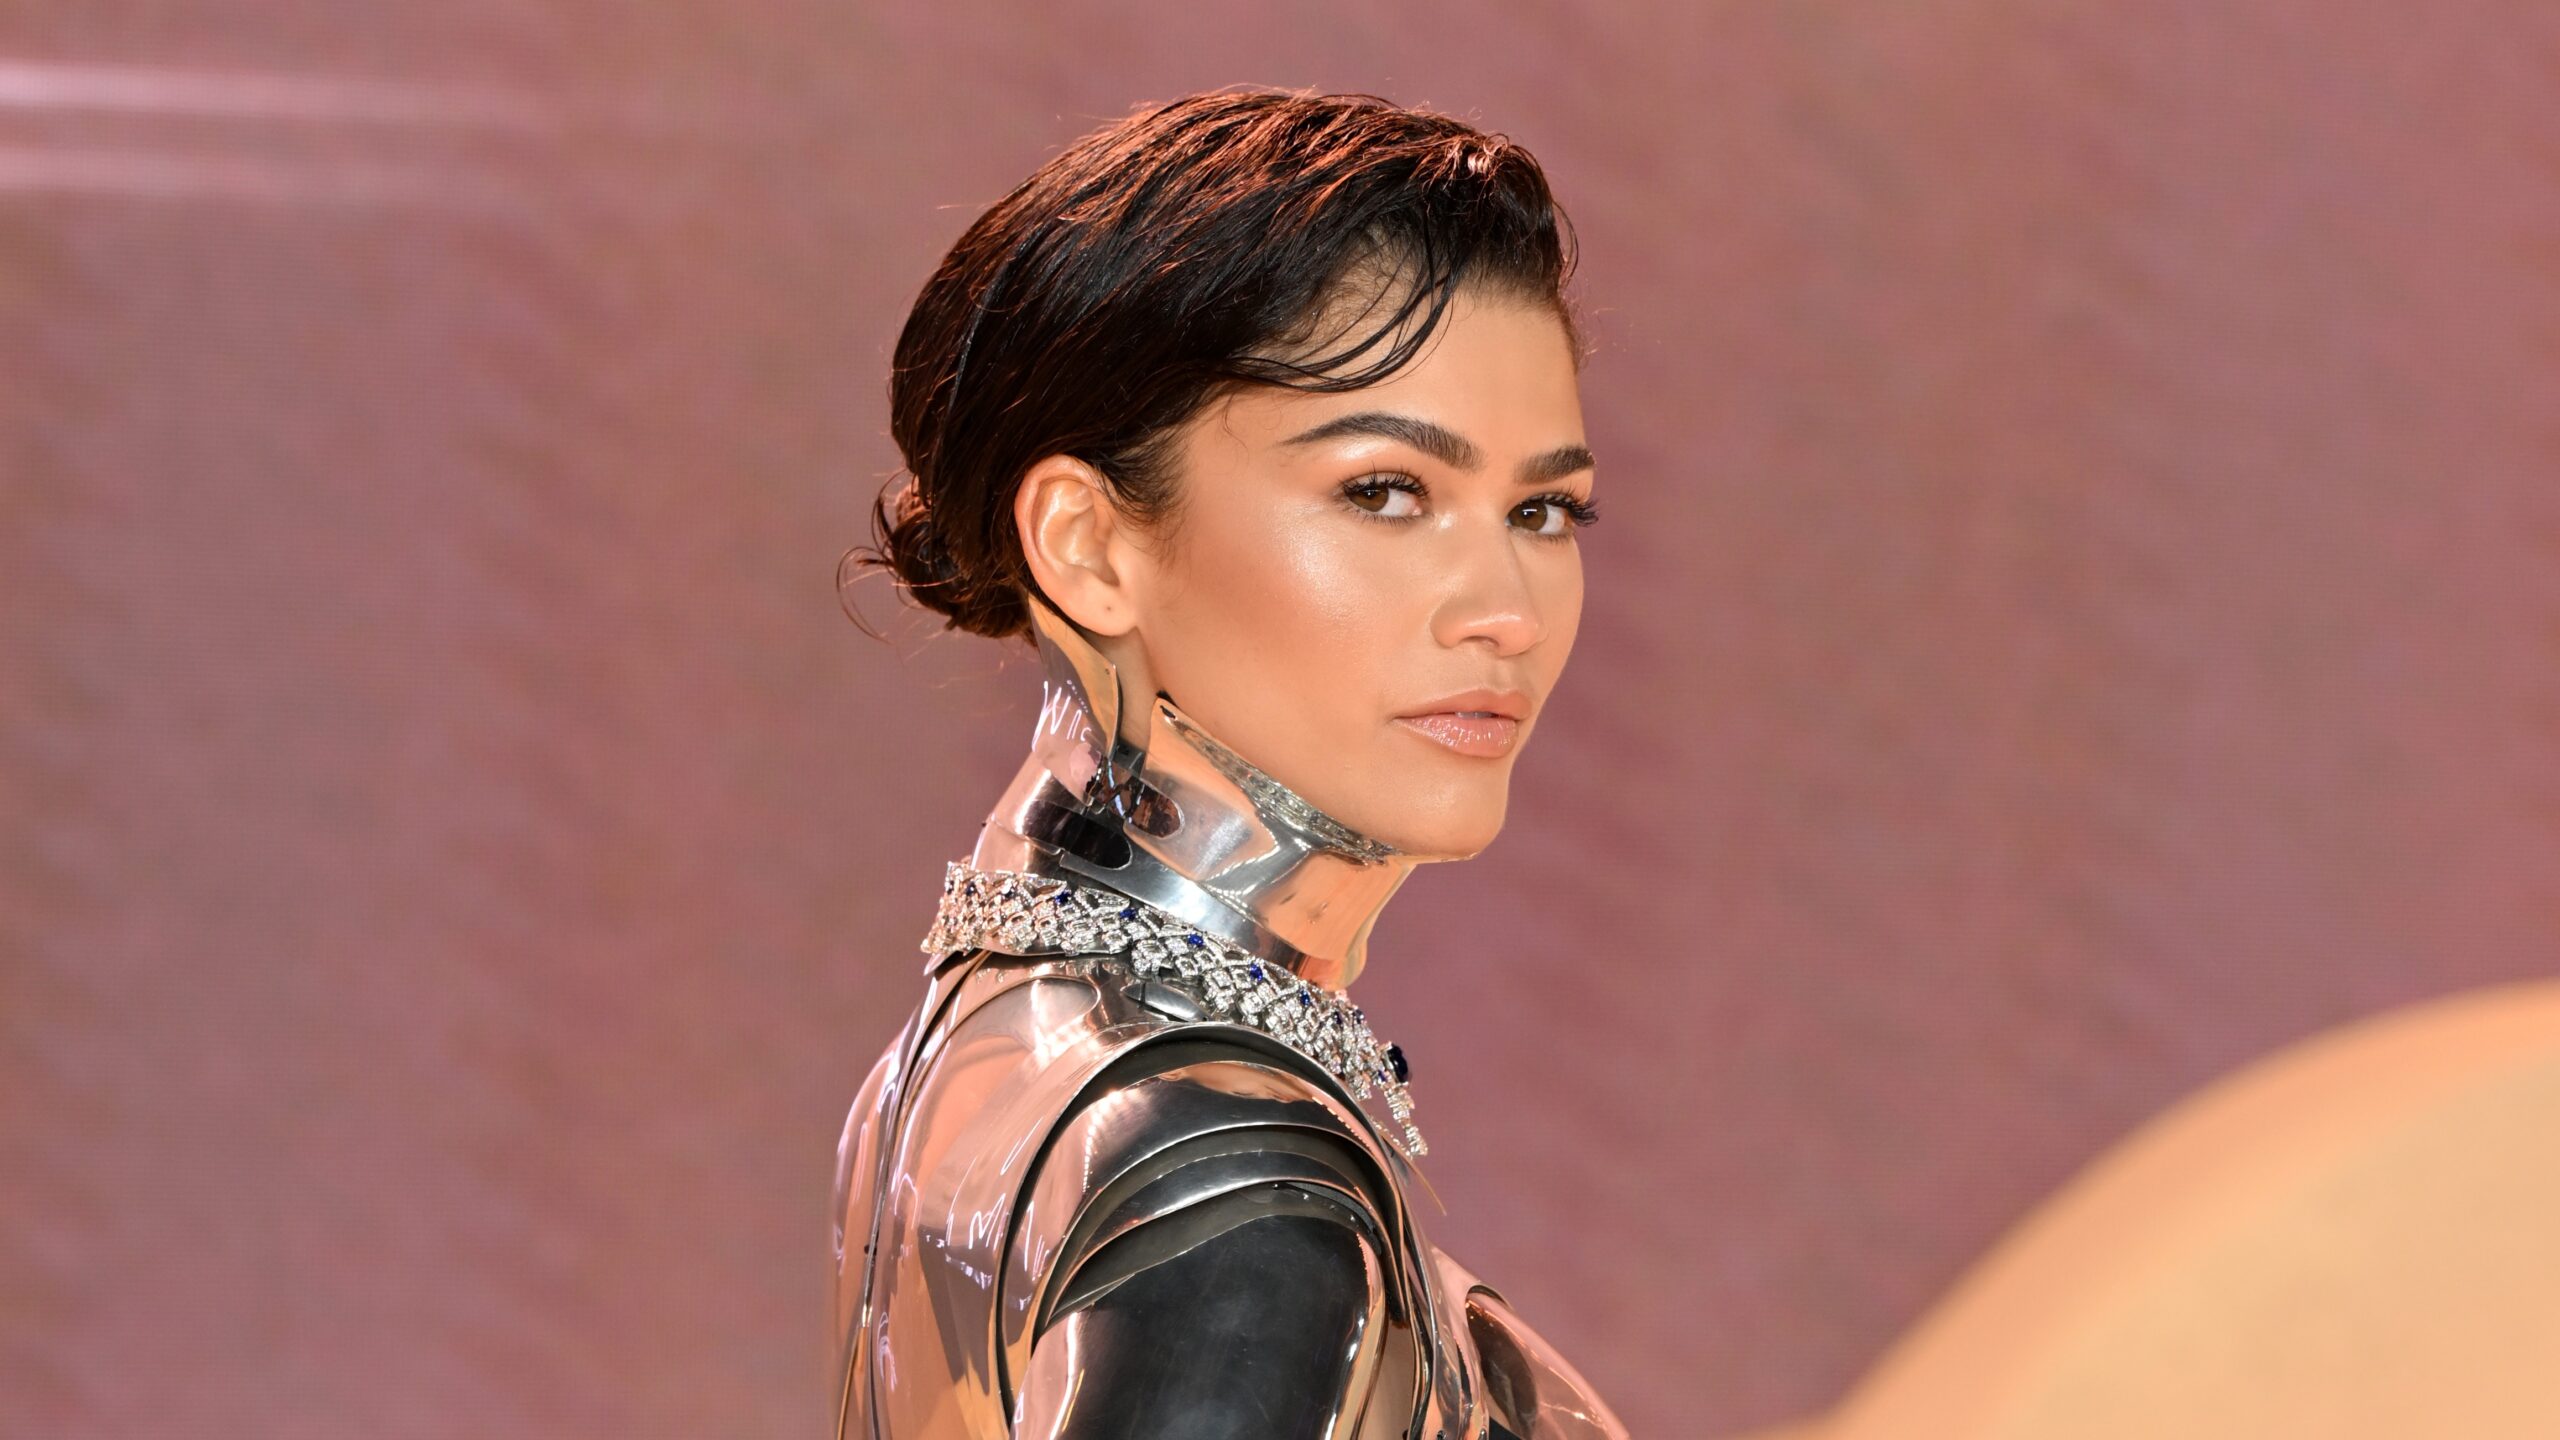 Zendaya’s Suit of Armour Stole The Show At Dune Premiere